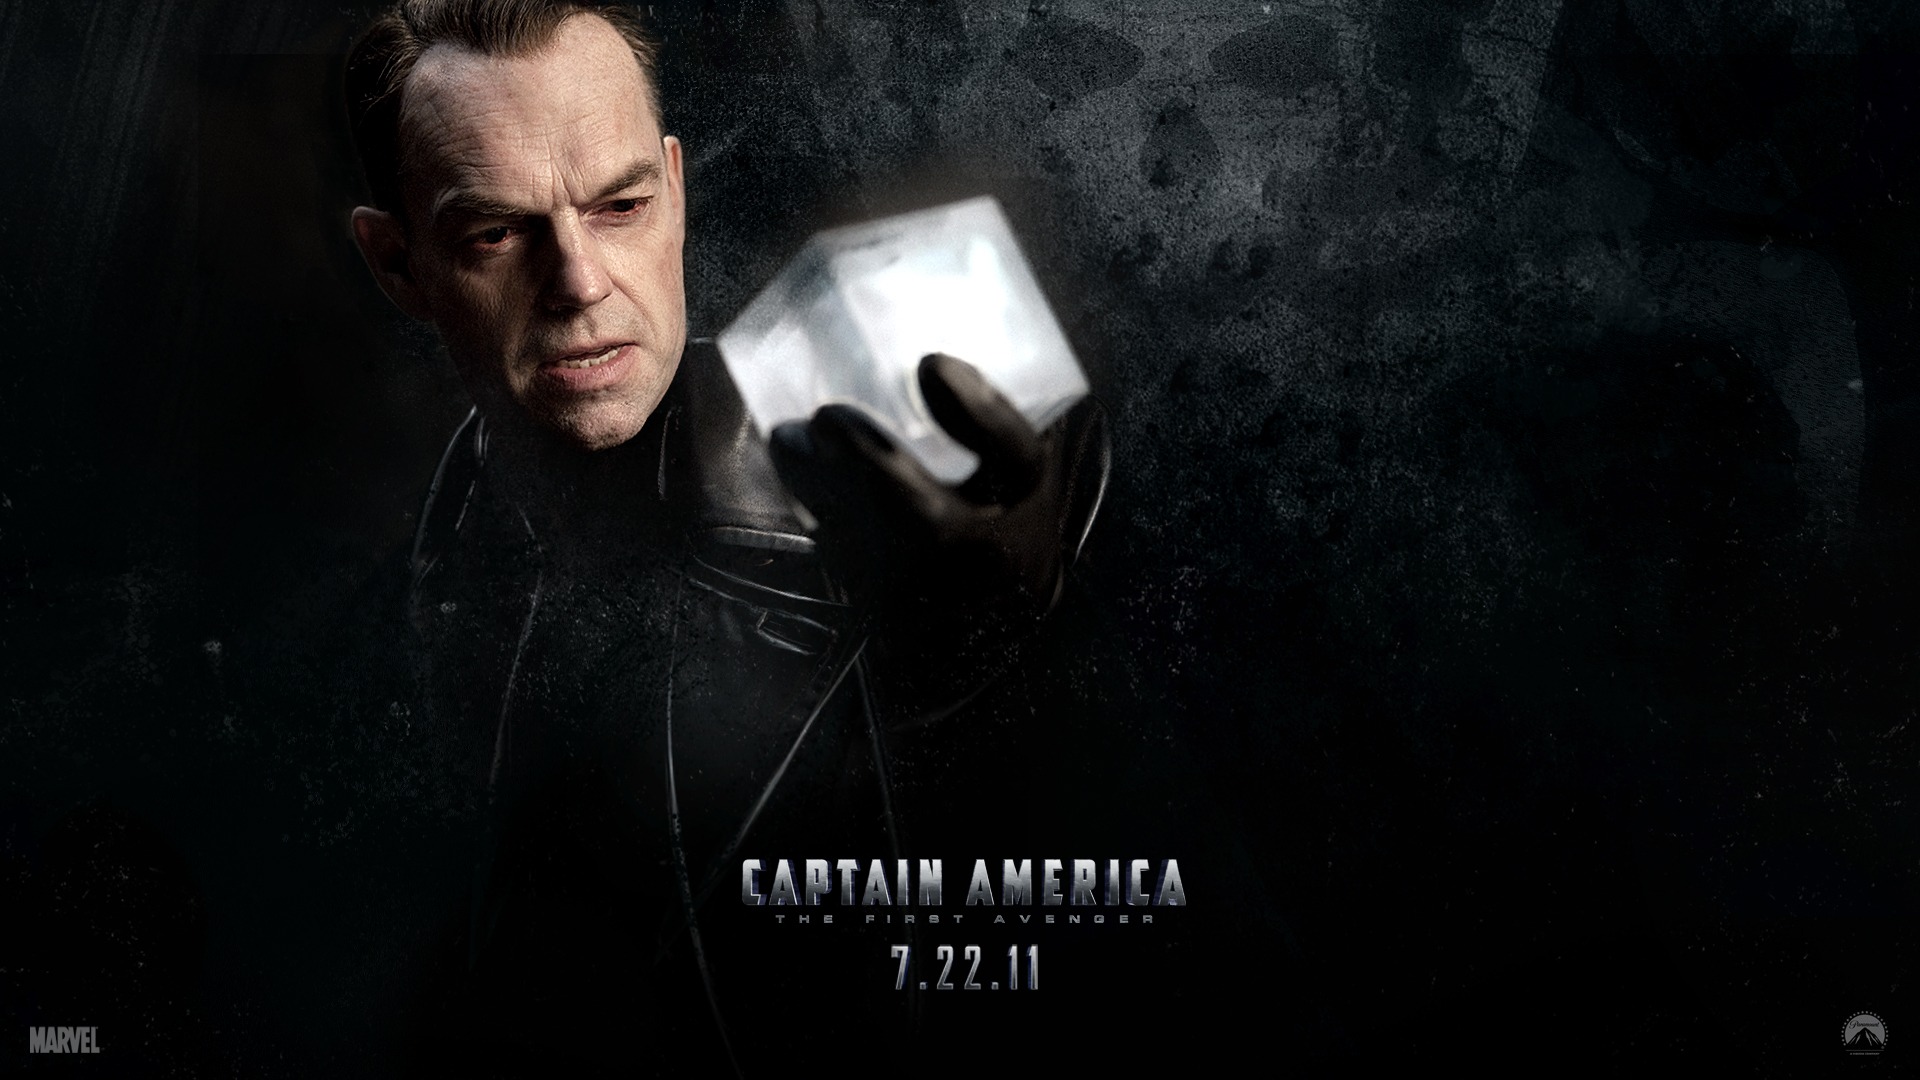 Captain America: The First Avenger wallpapers HD #13 - 1920x1080